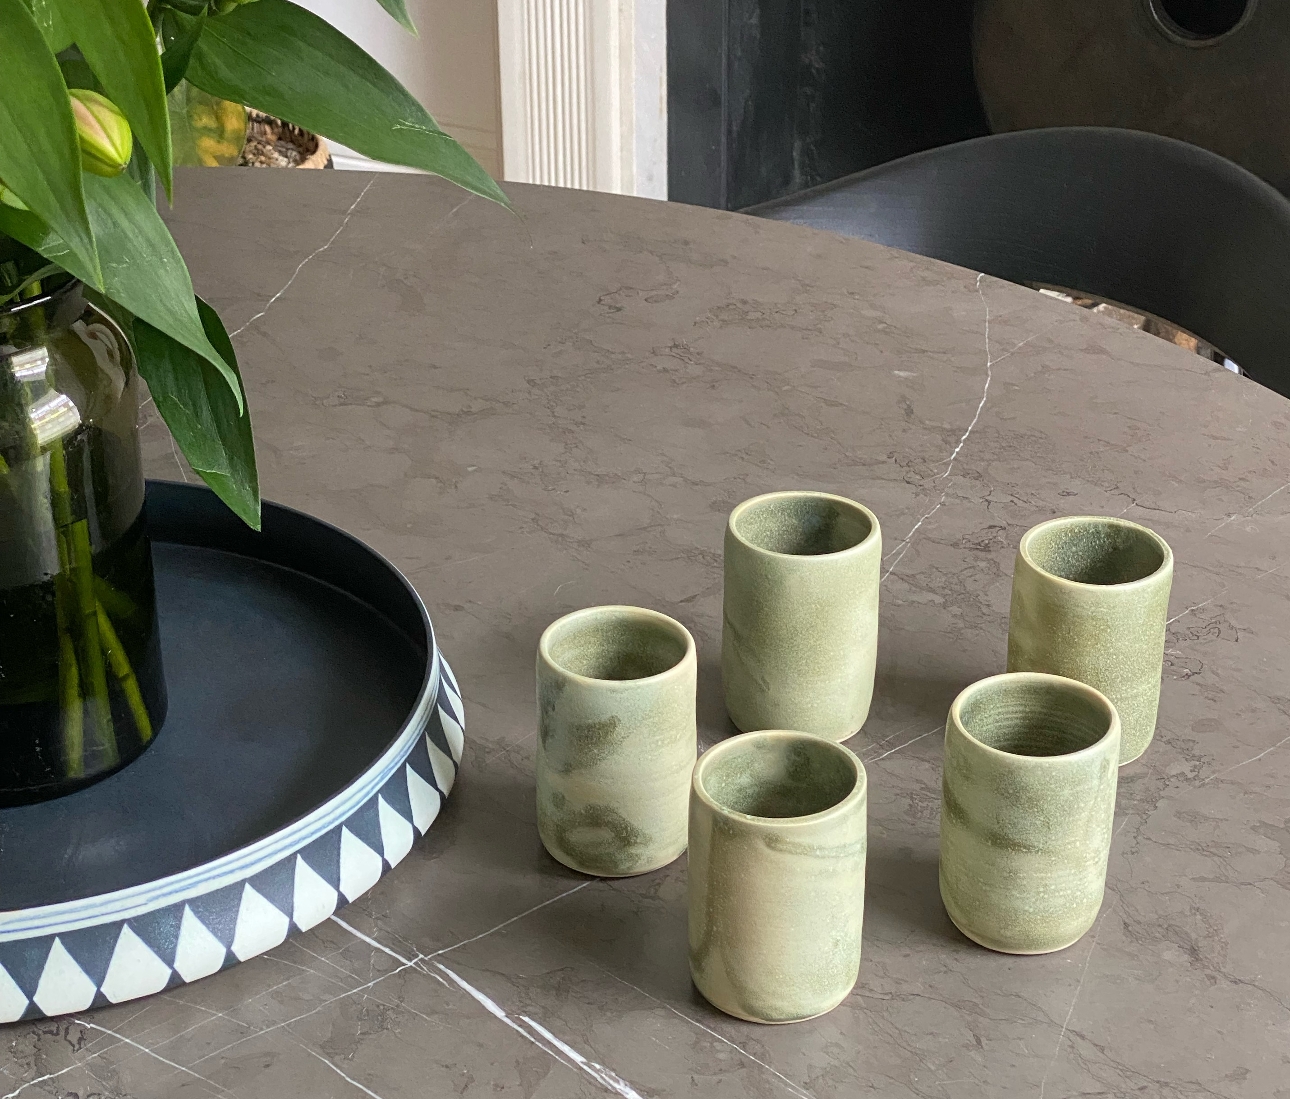 clay bowls and tumblers in marbled pattern